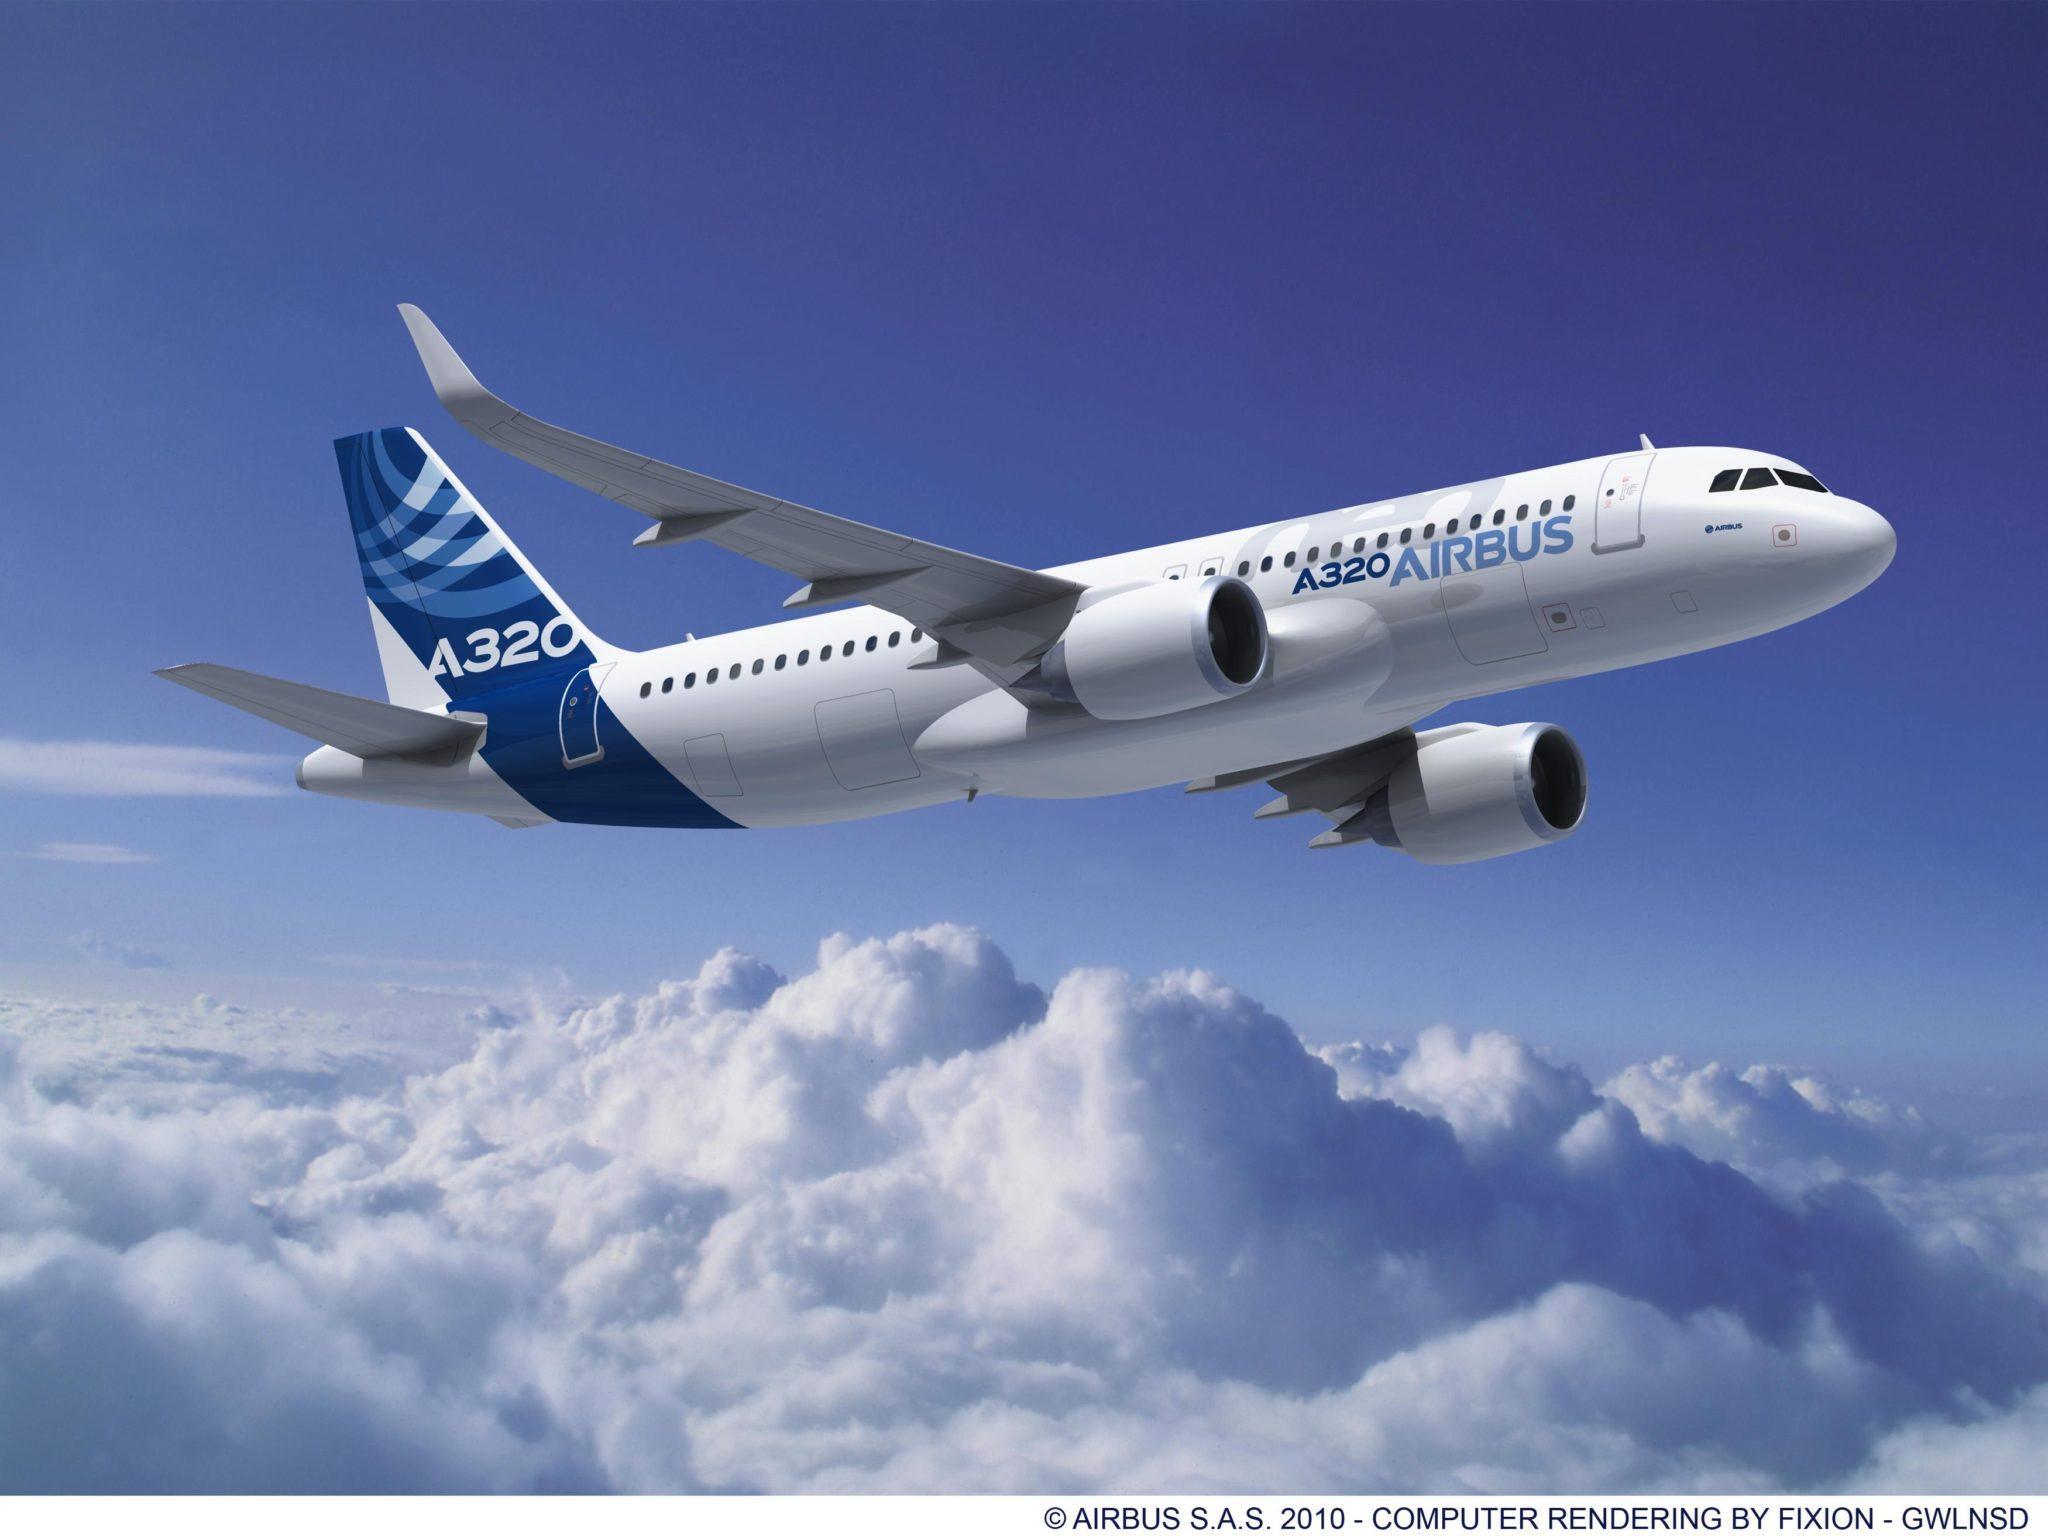 A320s Dominate Airbus Deliveries in February